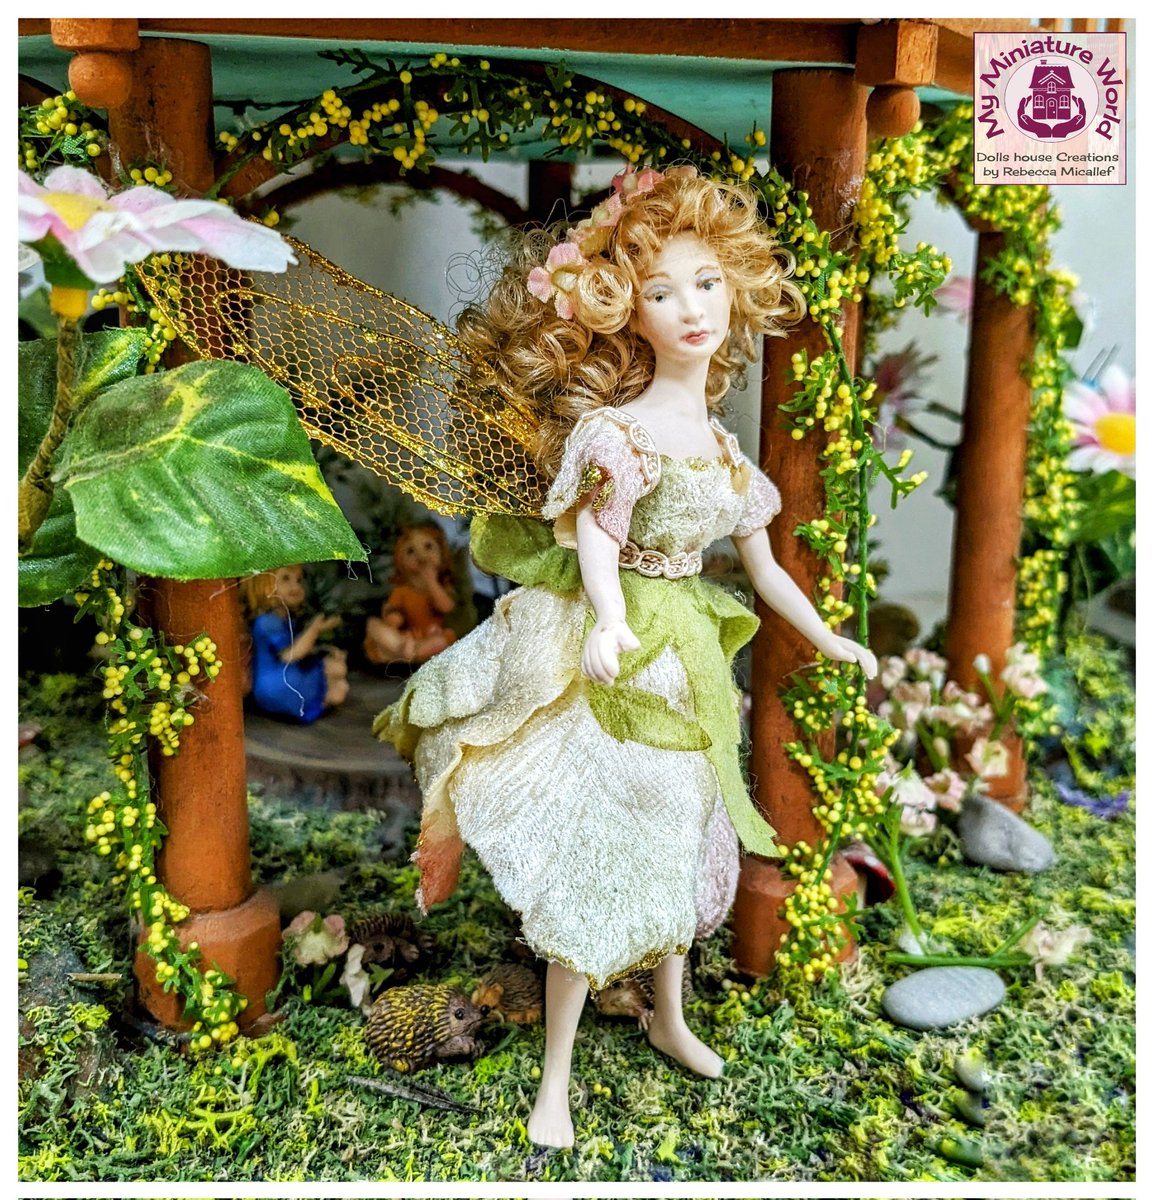 Today is the International Fairy Day. Meet Brier my dear fairy that lived in the Fairy's Nook. 
#dollshouse #miniatures #miniaturist #internationalday #fairyday #fairy #internaltionalfairyday #brier #picoftheday #photooftheday #pictureoftheday